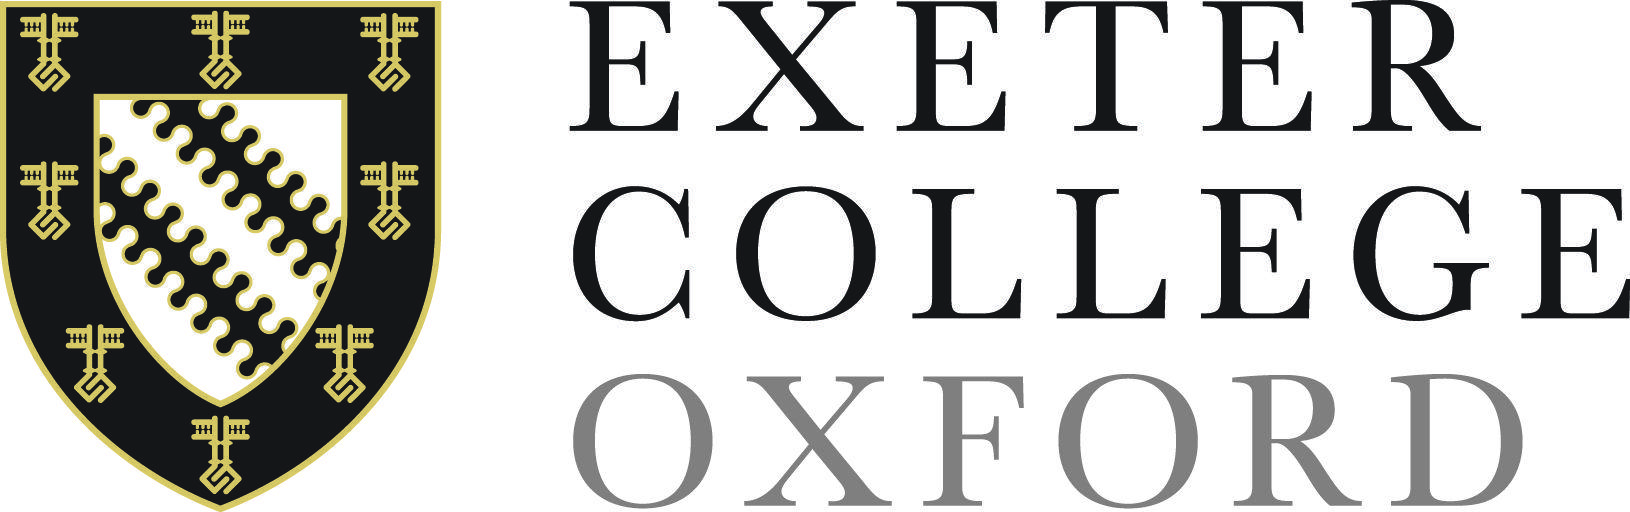 Universityofoxford Logo - Exeter College, Oxford: over 700 years of excellence